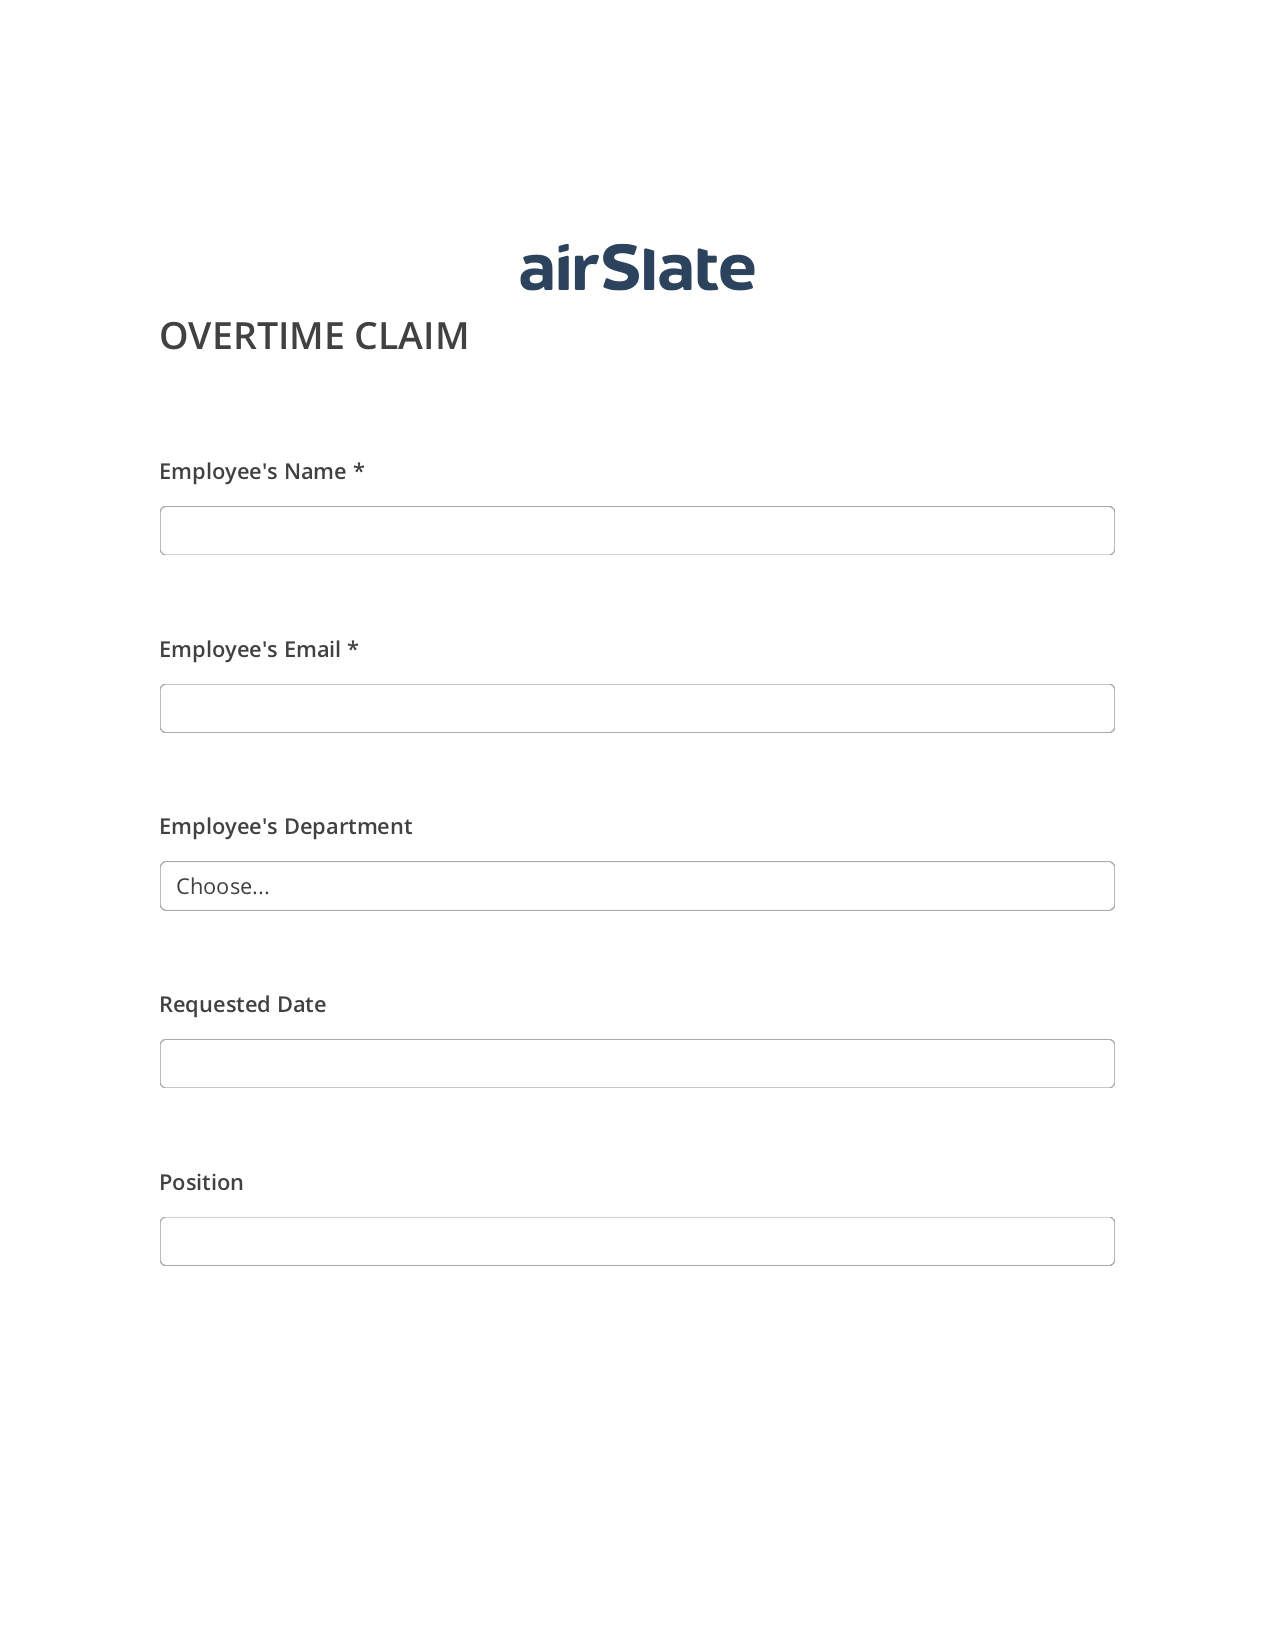 Overtime Claim Flow Archive to SharePoint Folder Bot